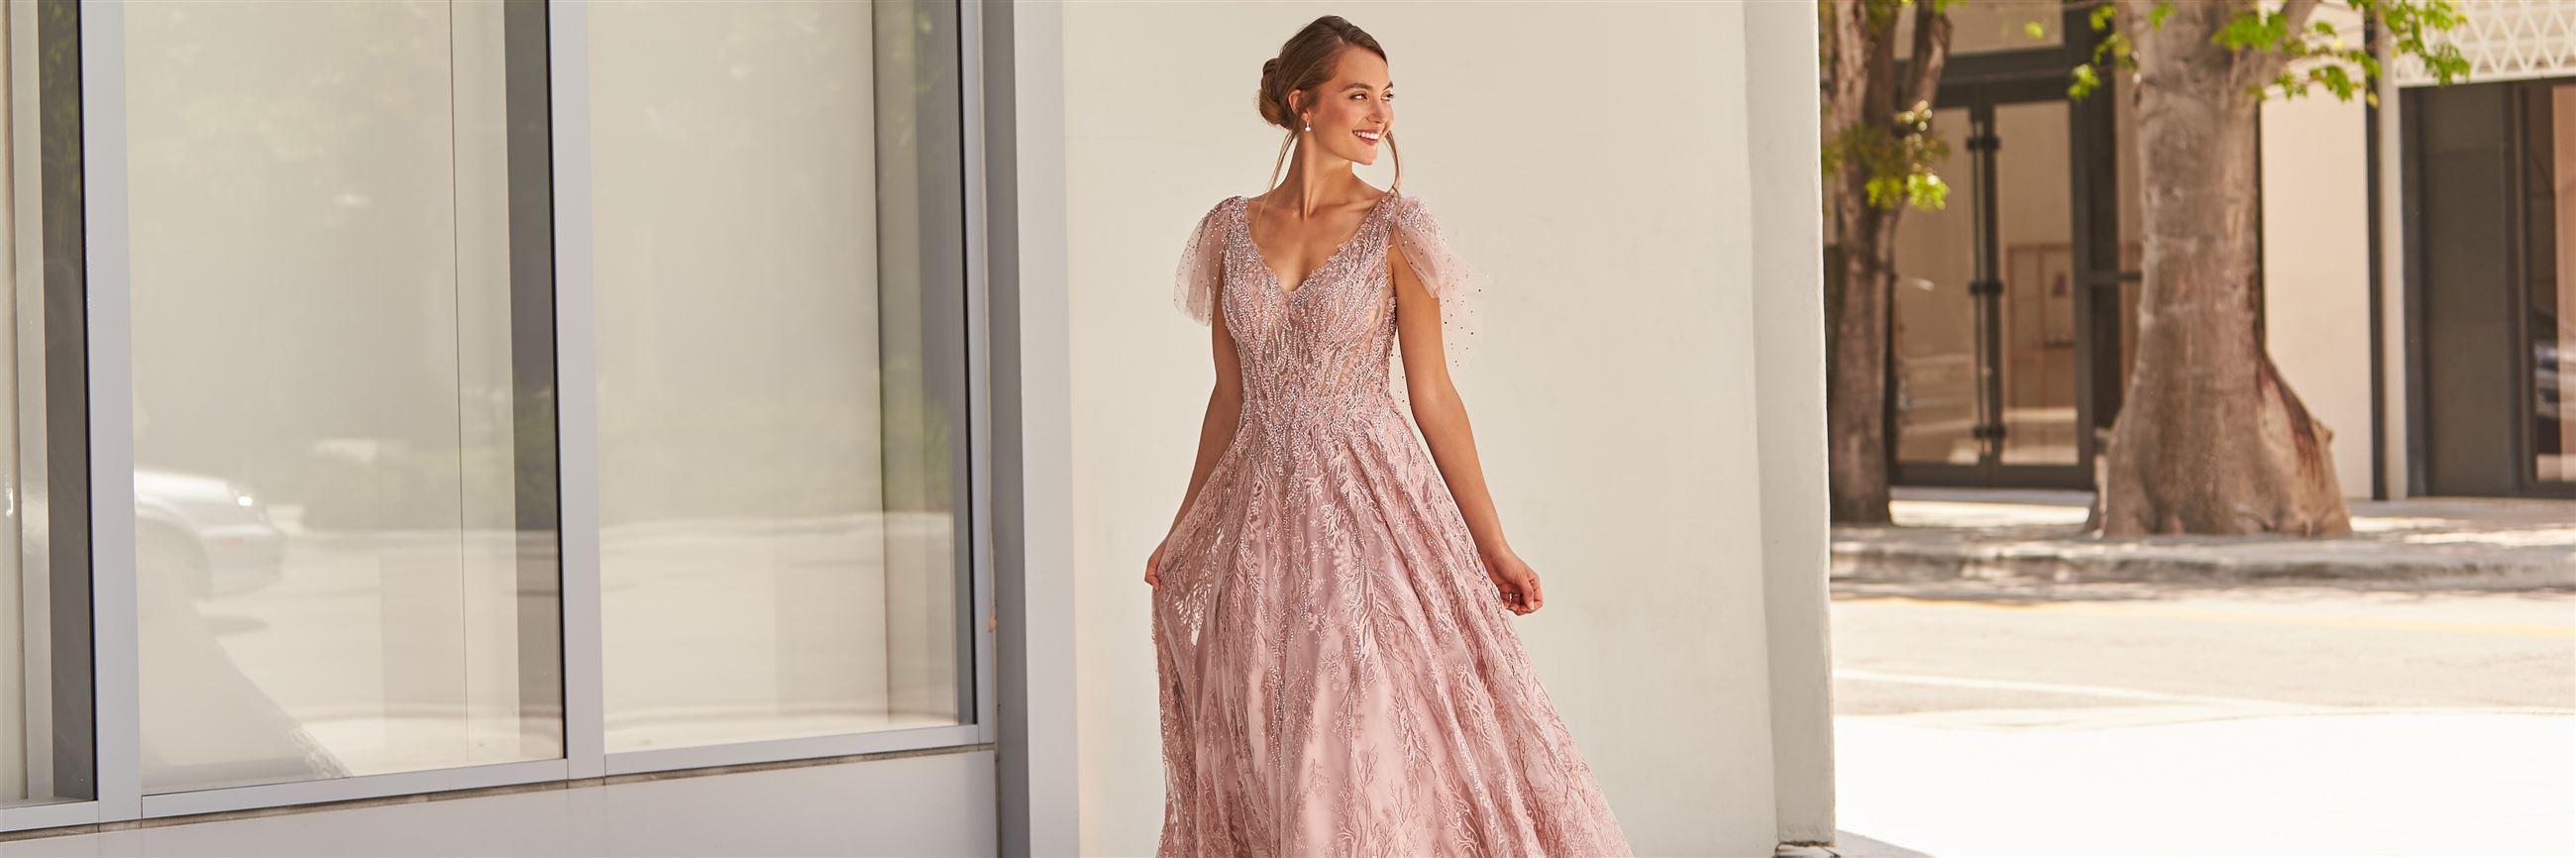 Where to buy mother of the bride dresses in Buffalo, New York